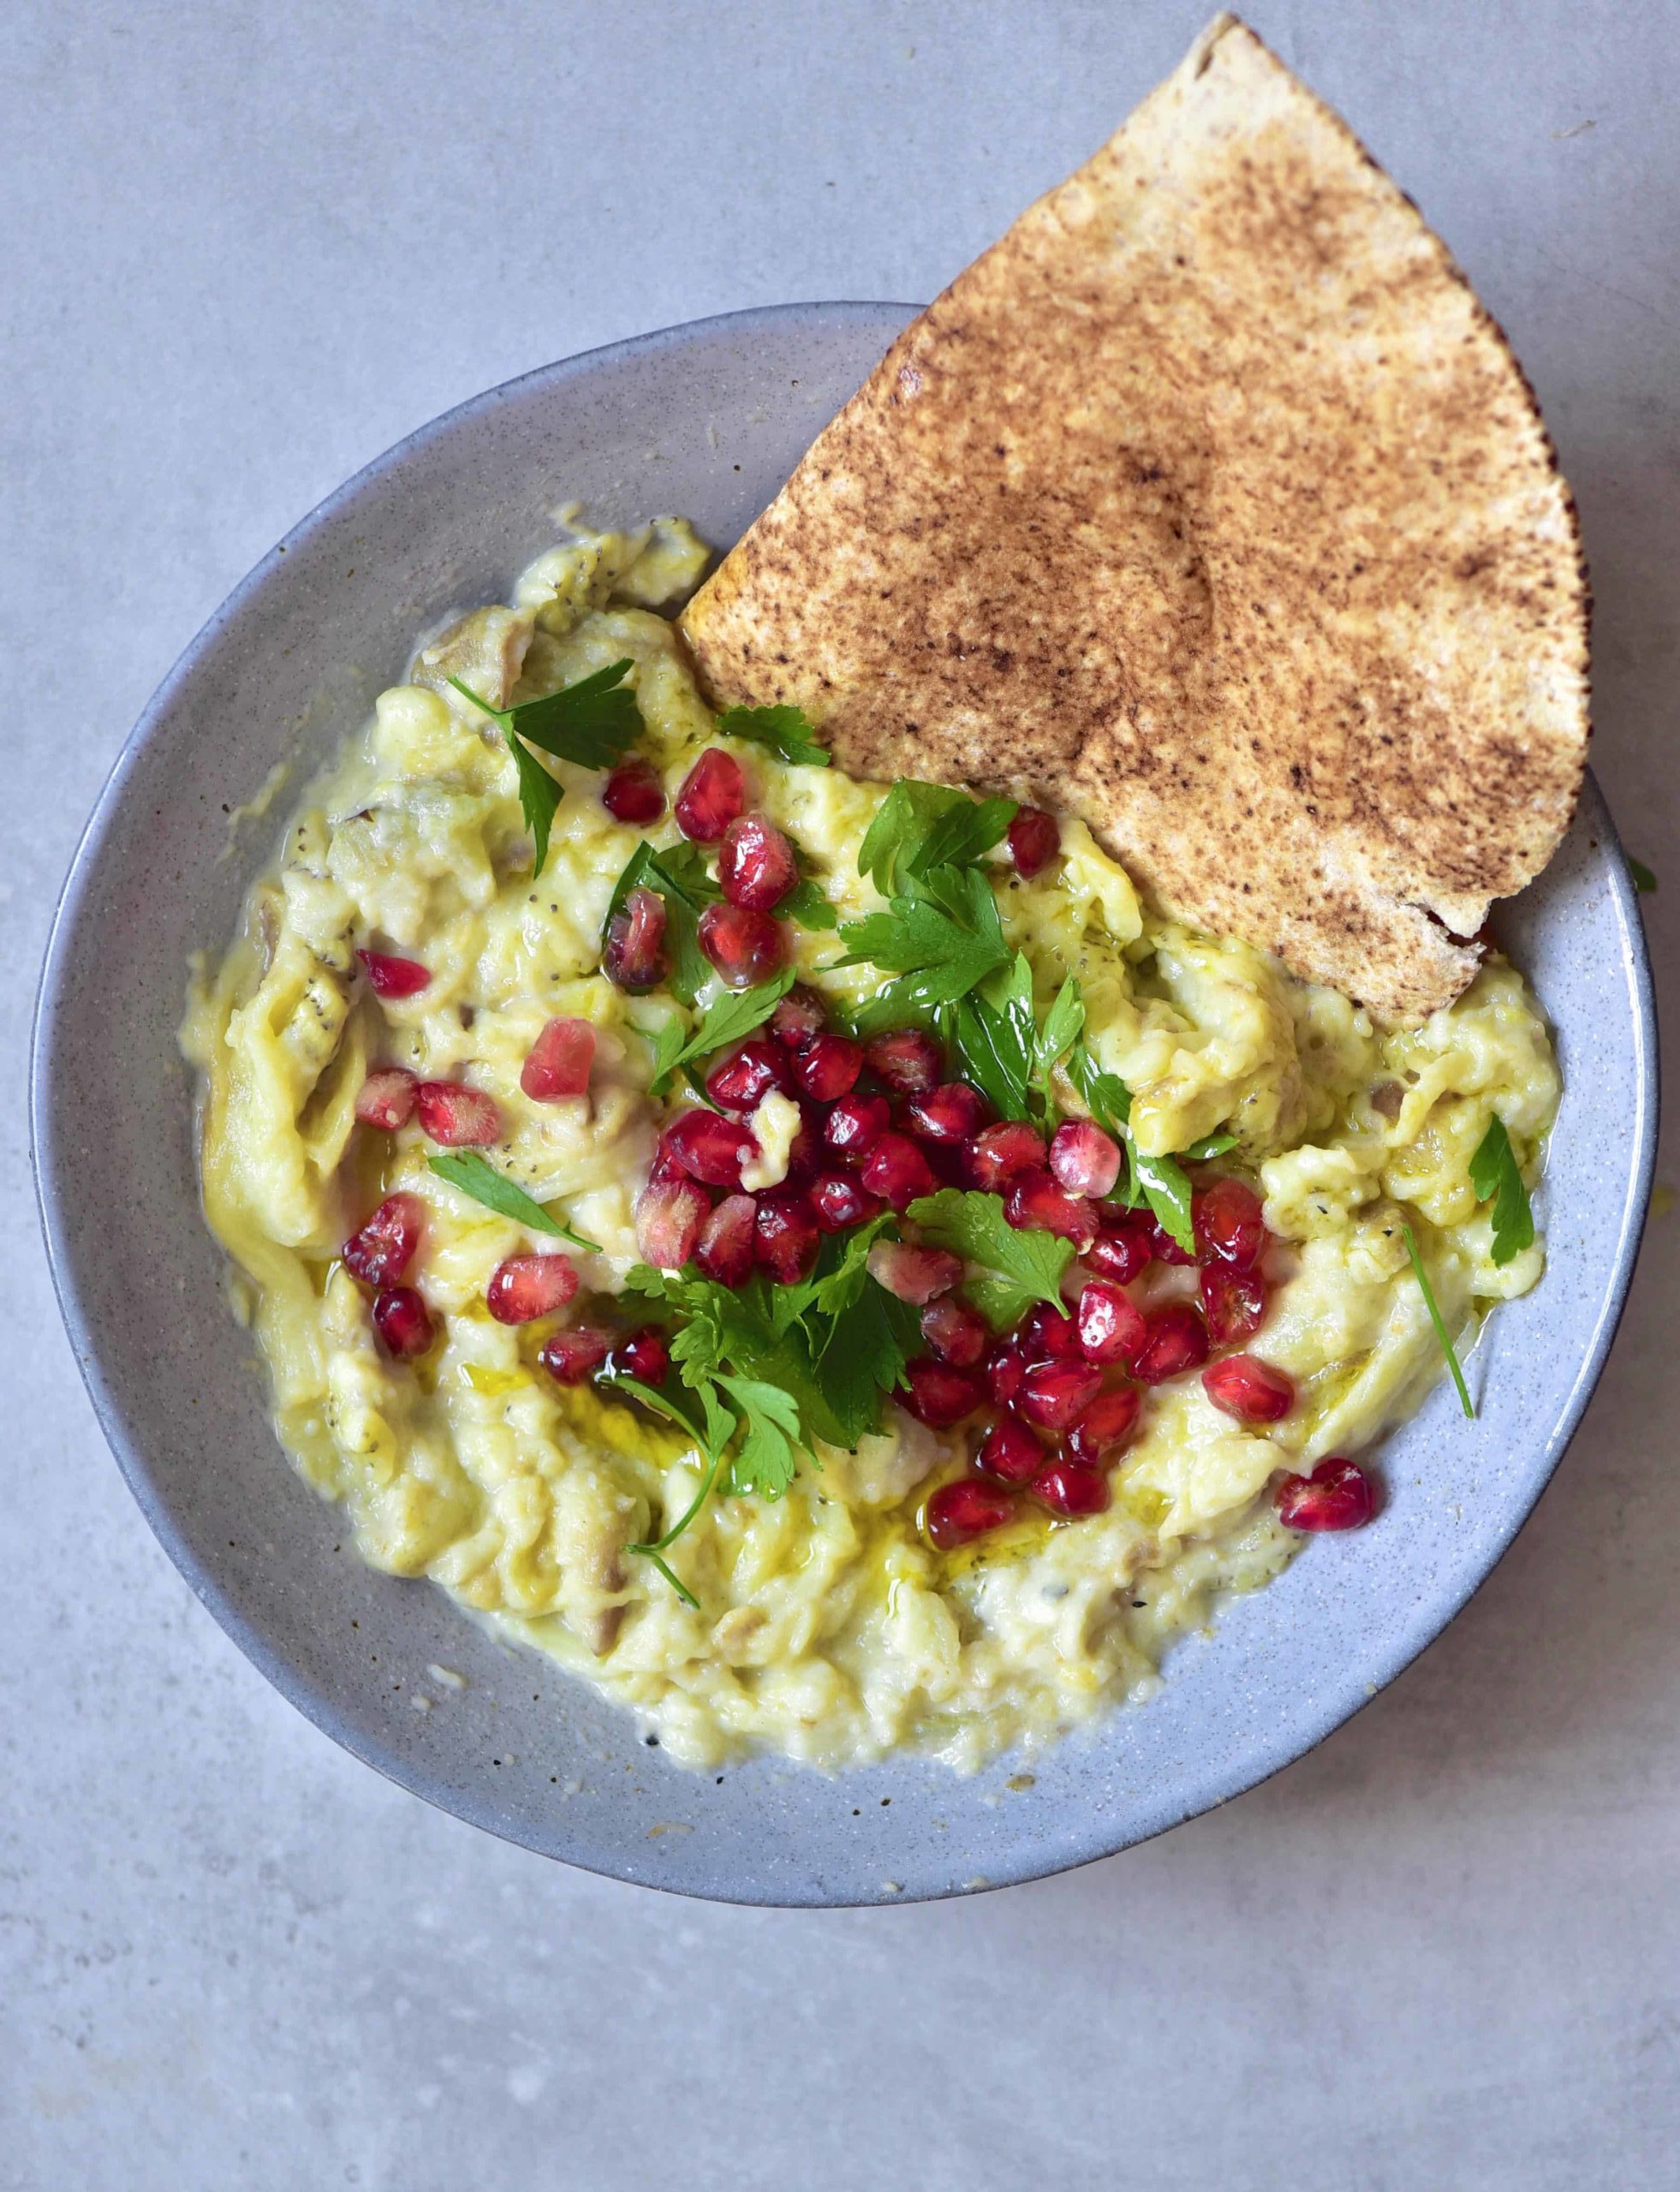 Simple Smoky Eggplant Dip ( Moutabal) in a bowl with pita bread